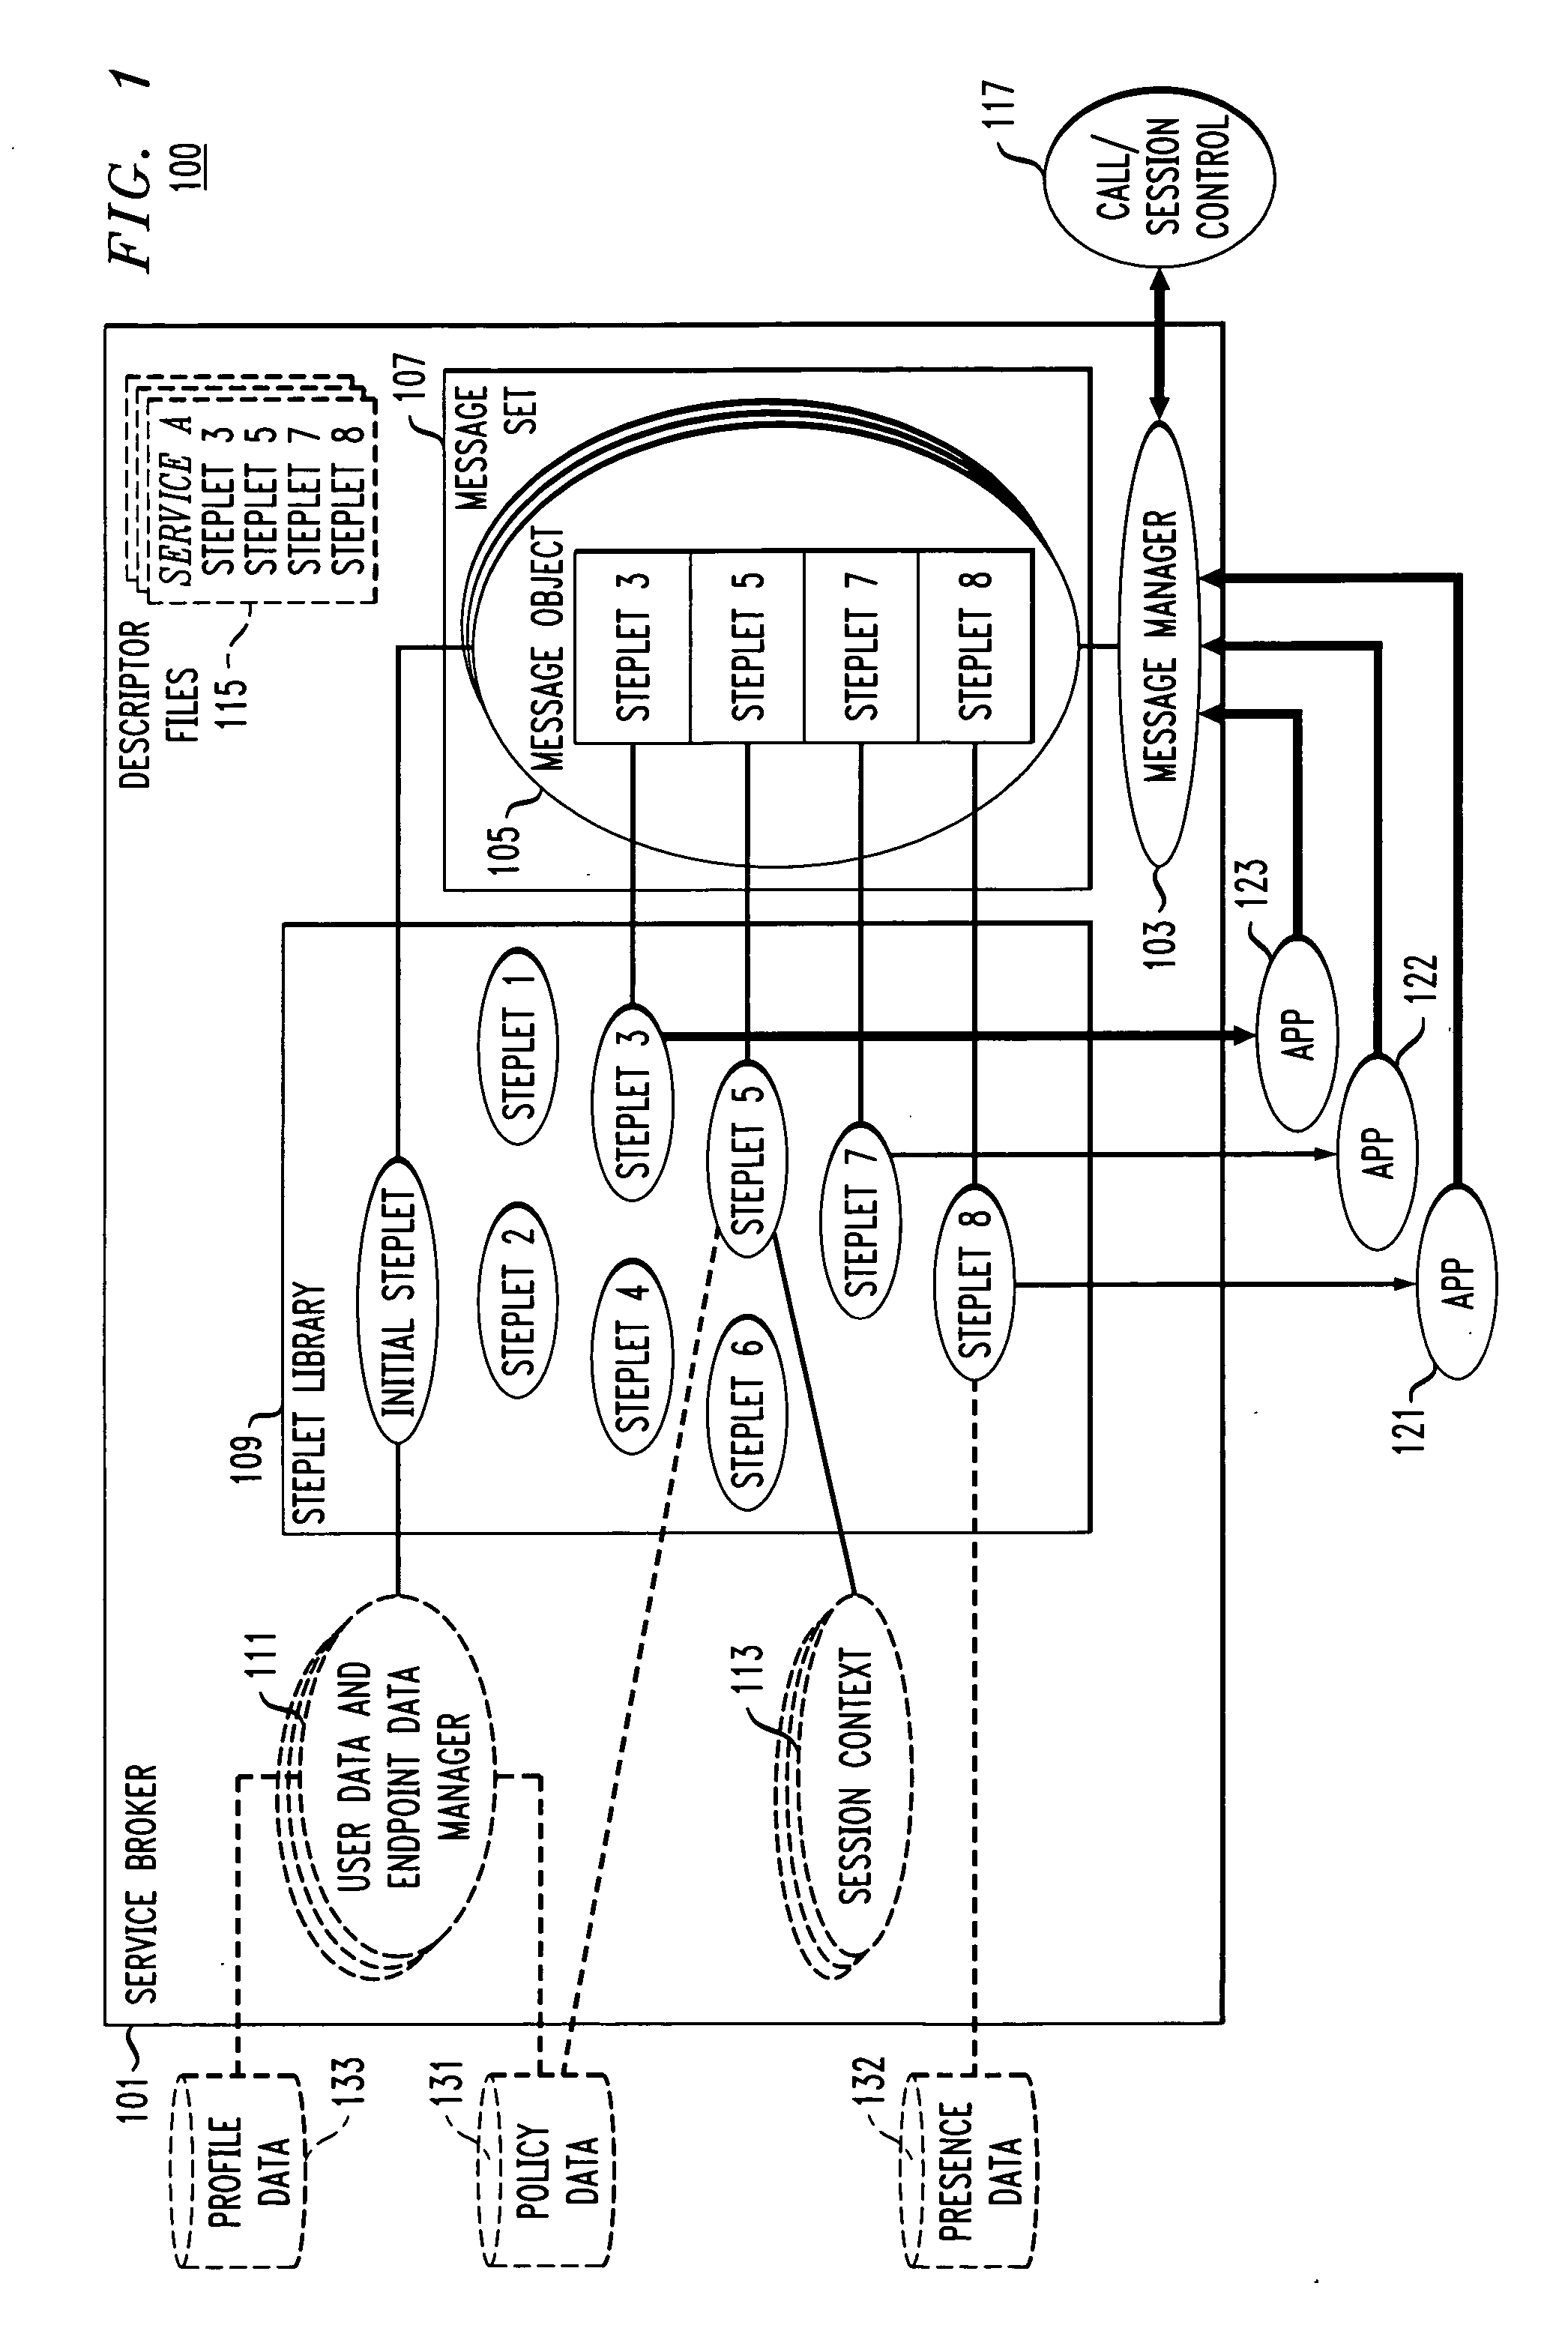 Enhanced system for controlling service interaction and for providing blending of services